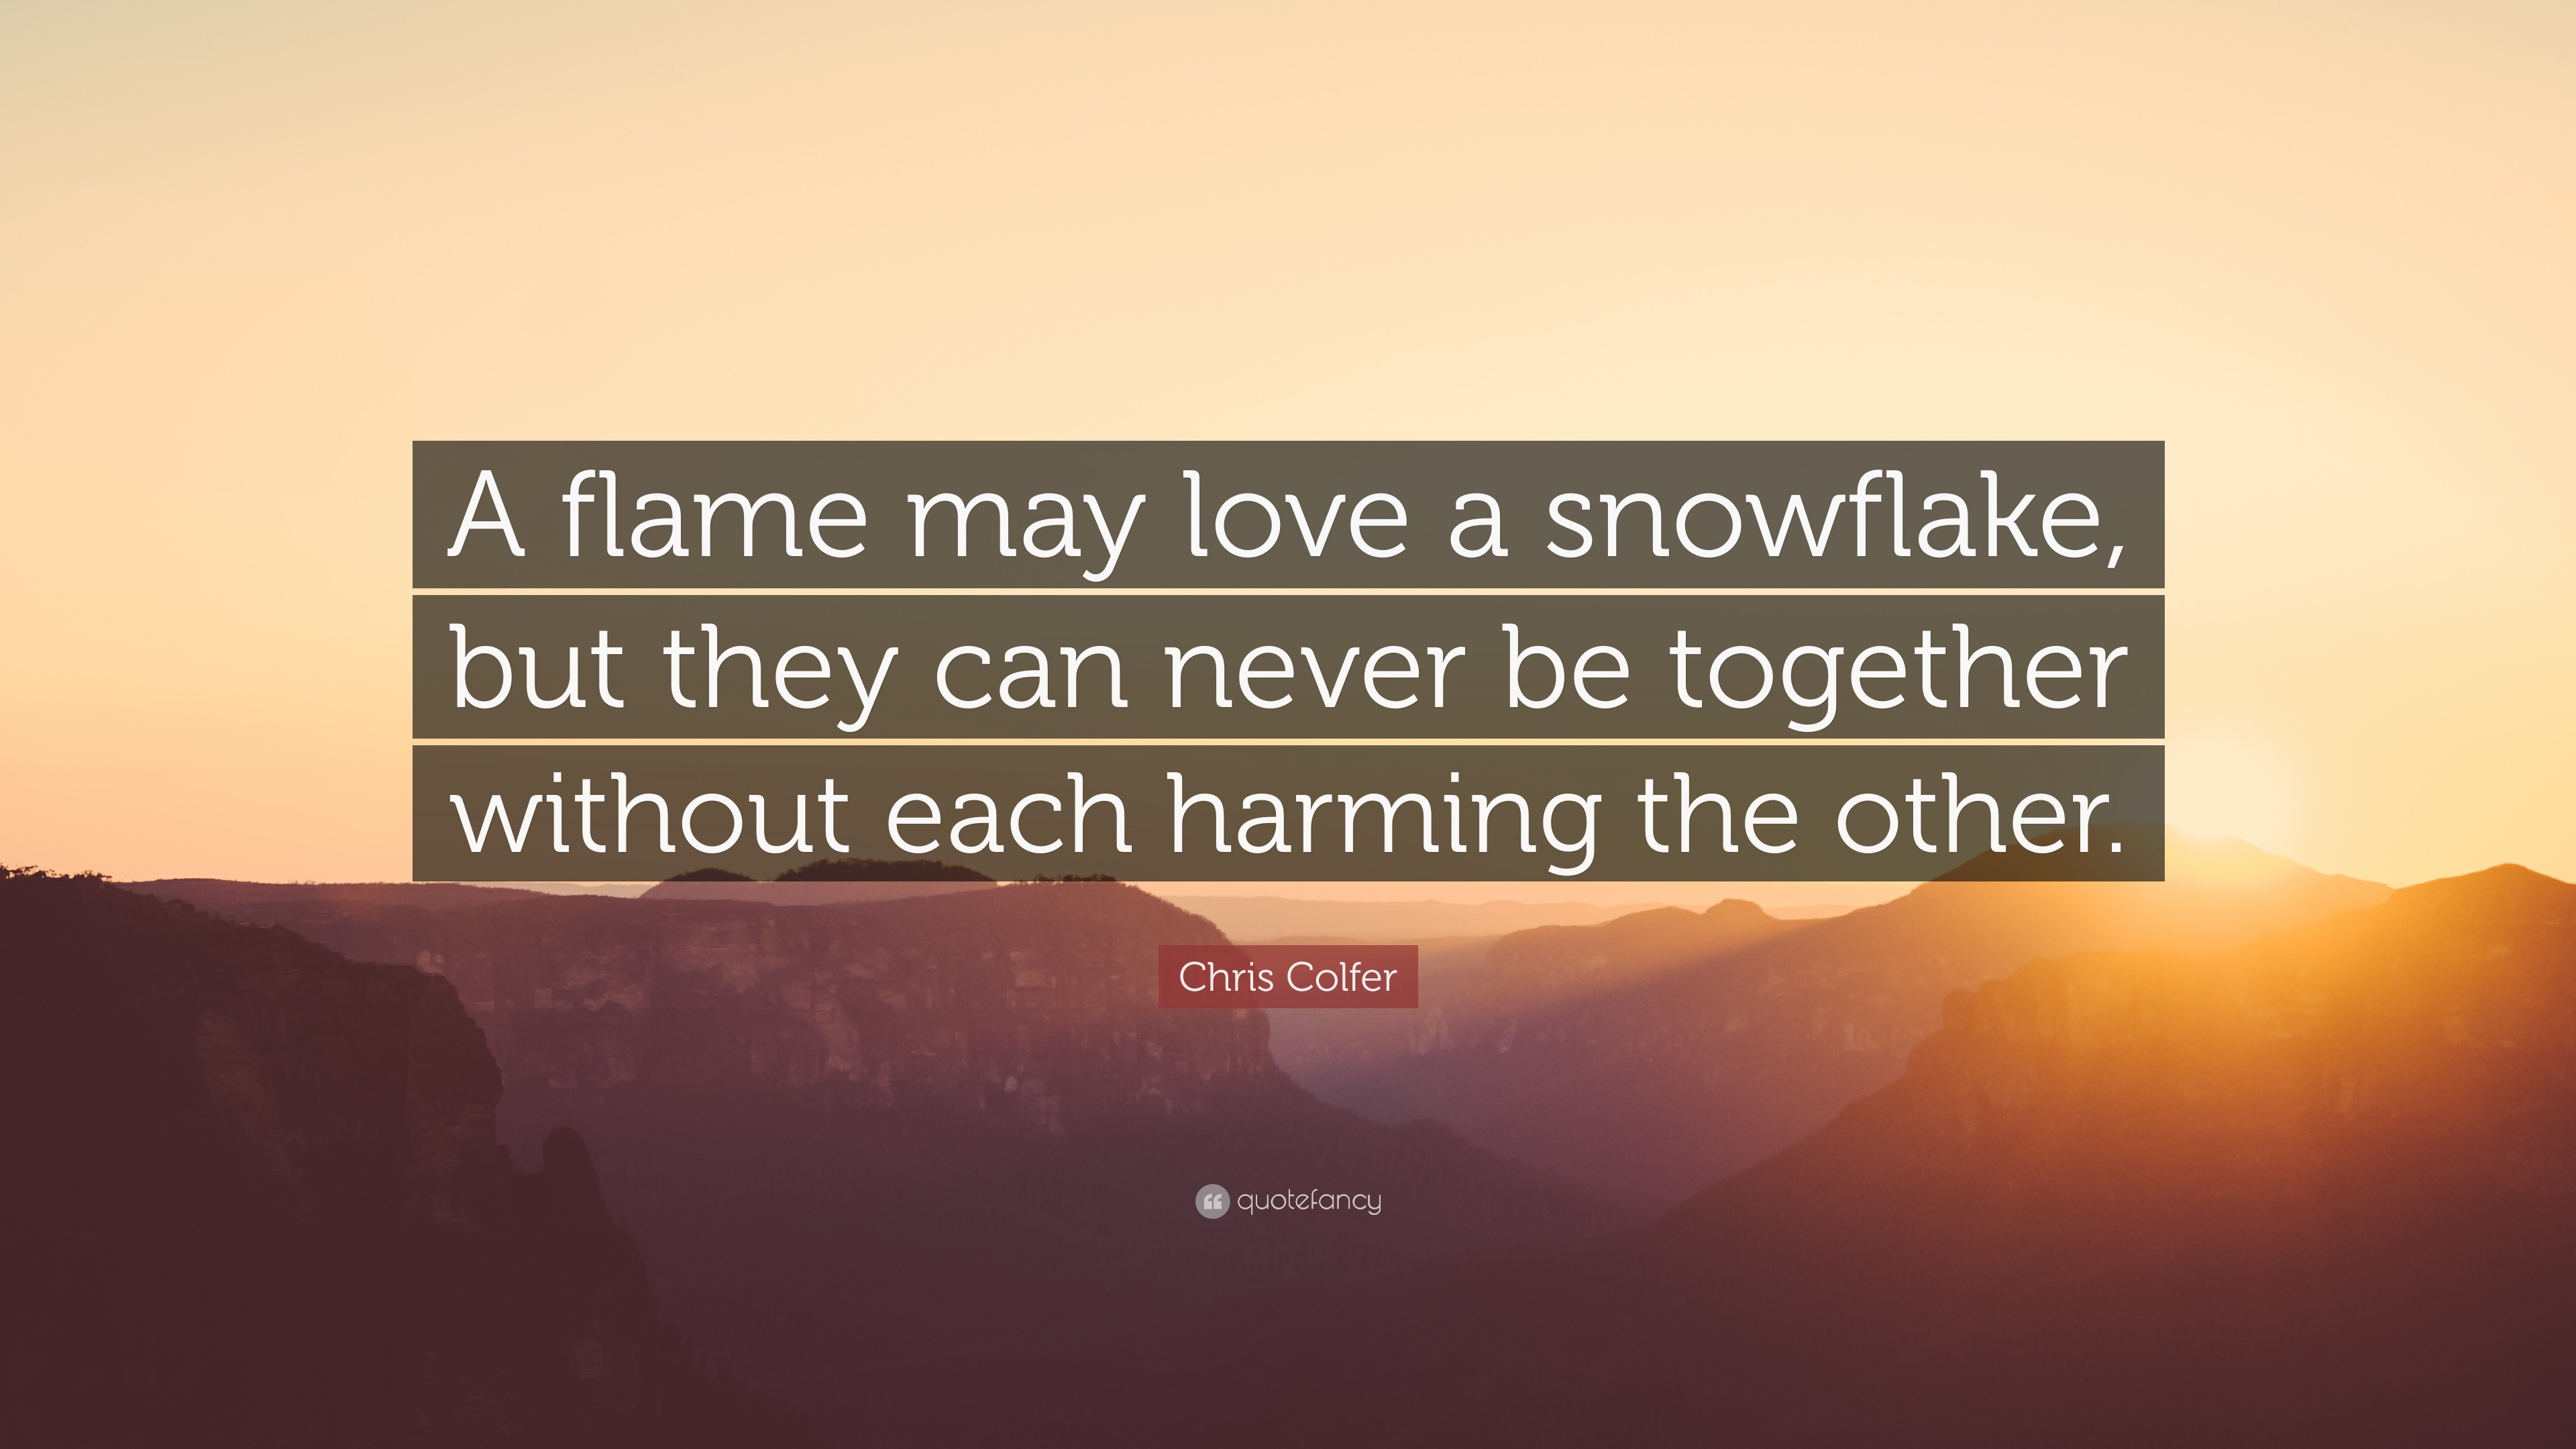 Chris Colfer Quote “A flame may love a snowflake but they can never